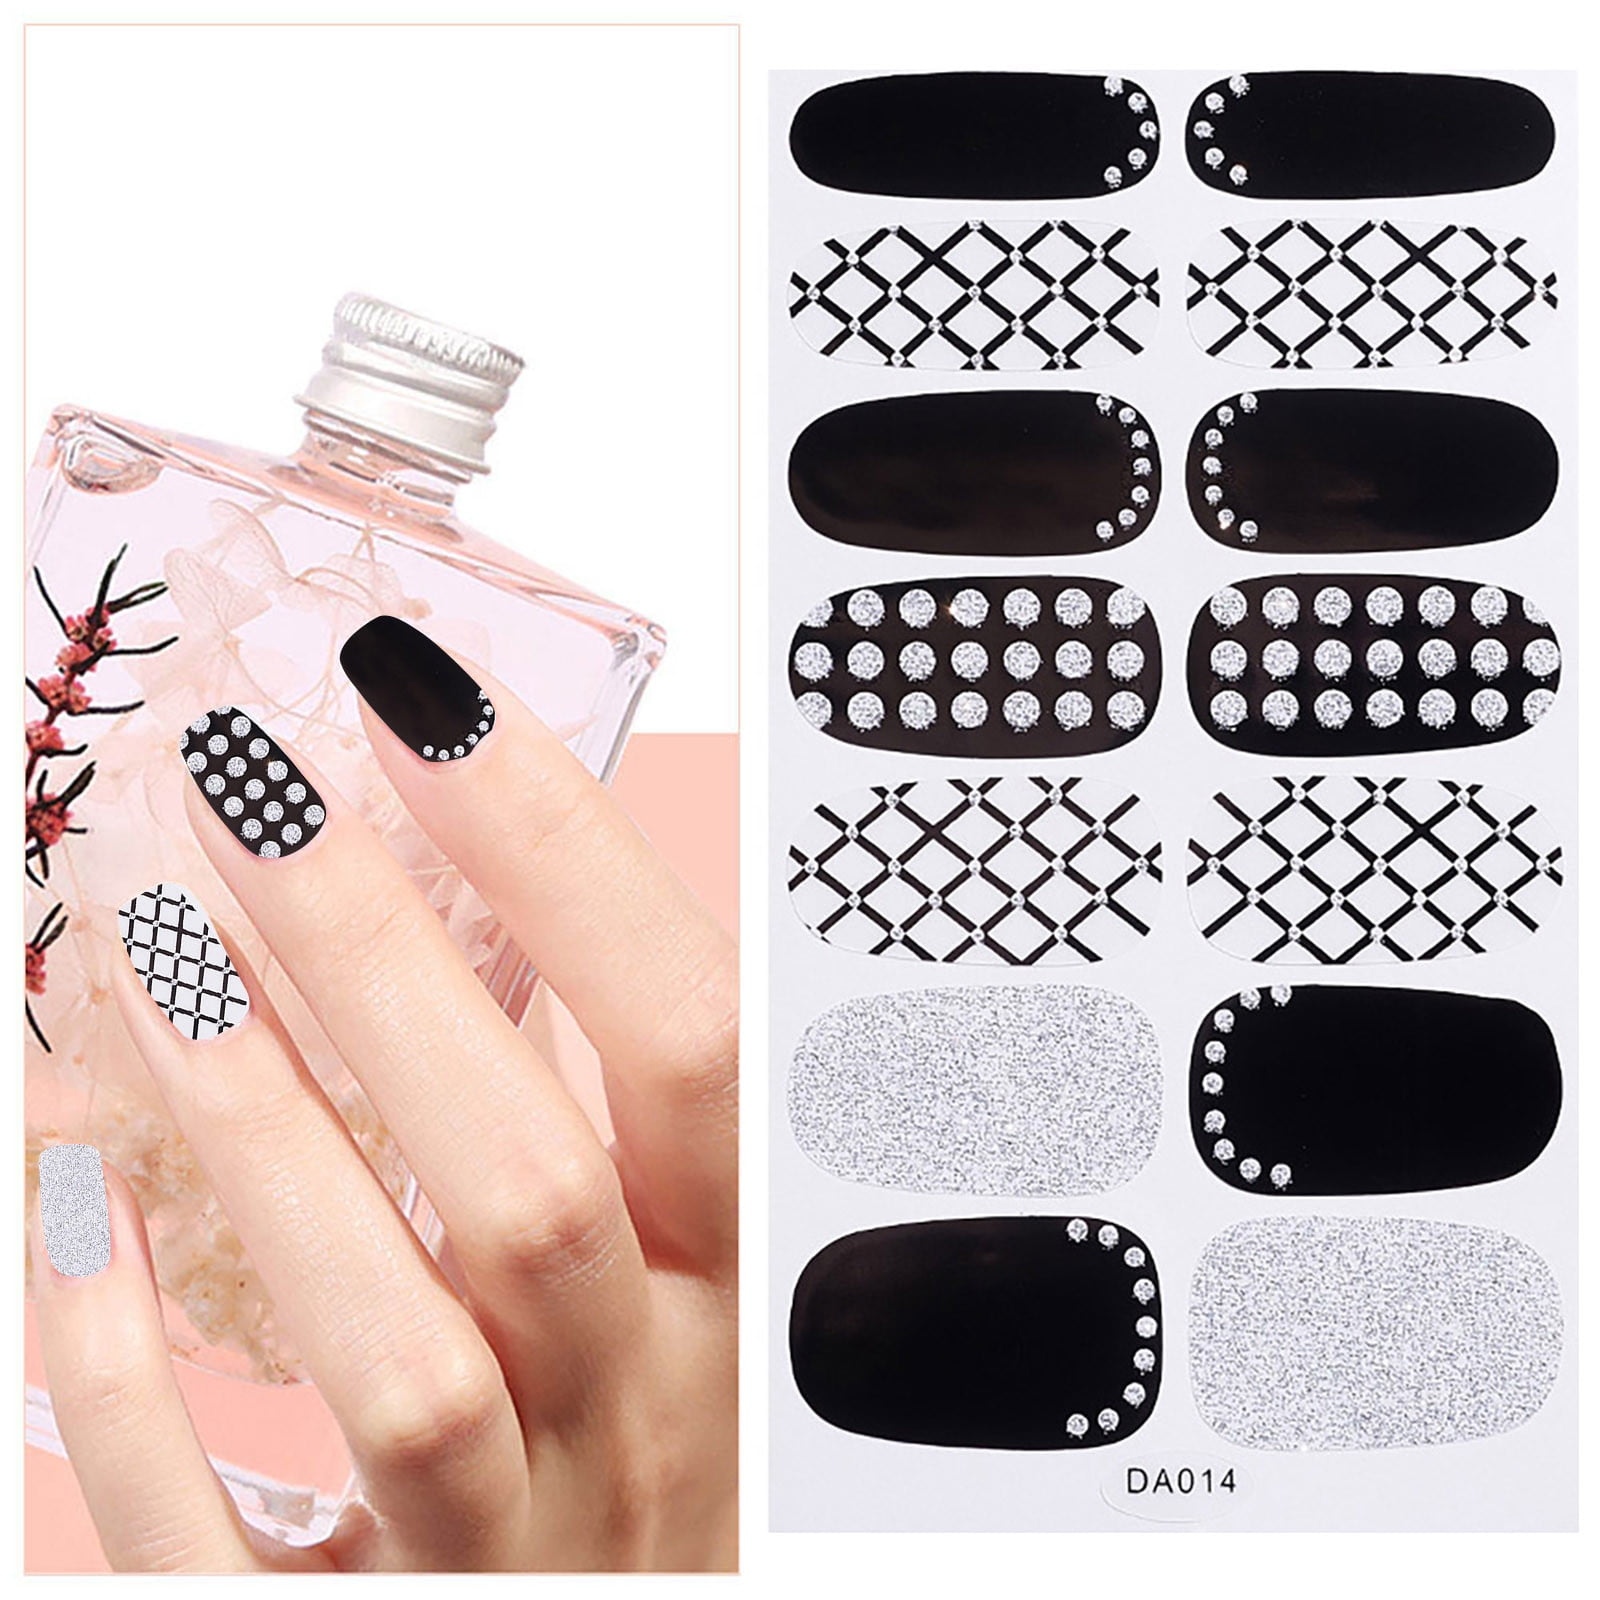 Semi-Cured Gel Nail Wraps Simple Colorful Adhesive Waterproof Full Cover  Long Lasting Gel Nail Stickers Harden In UV Lamp Need - AliExpress